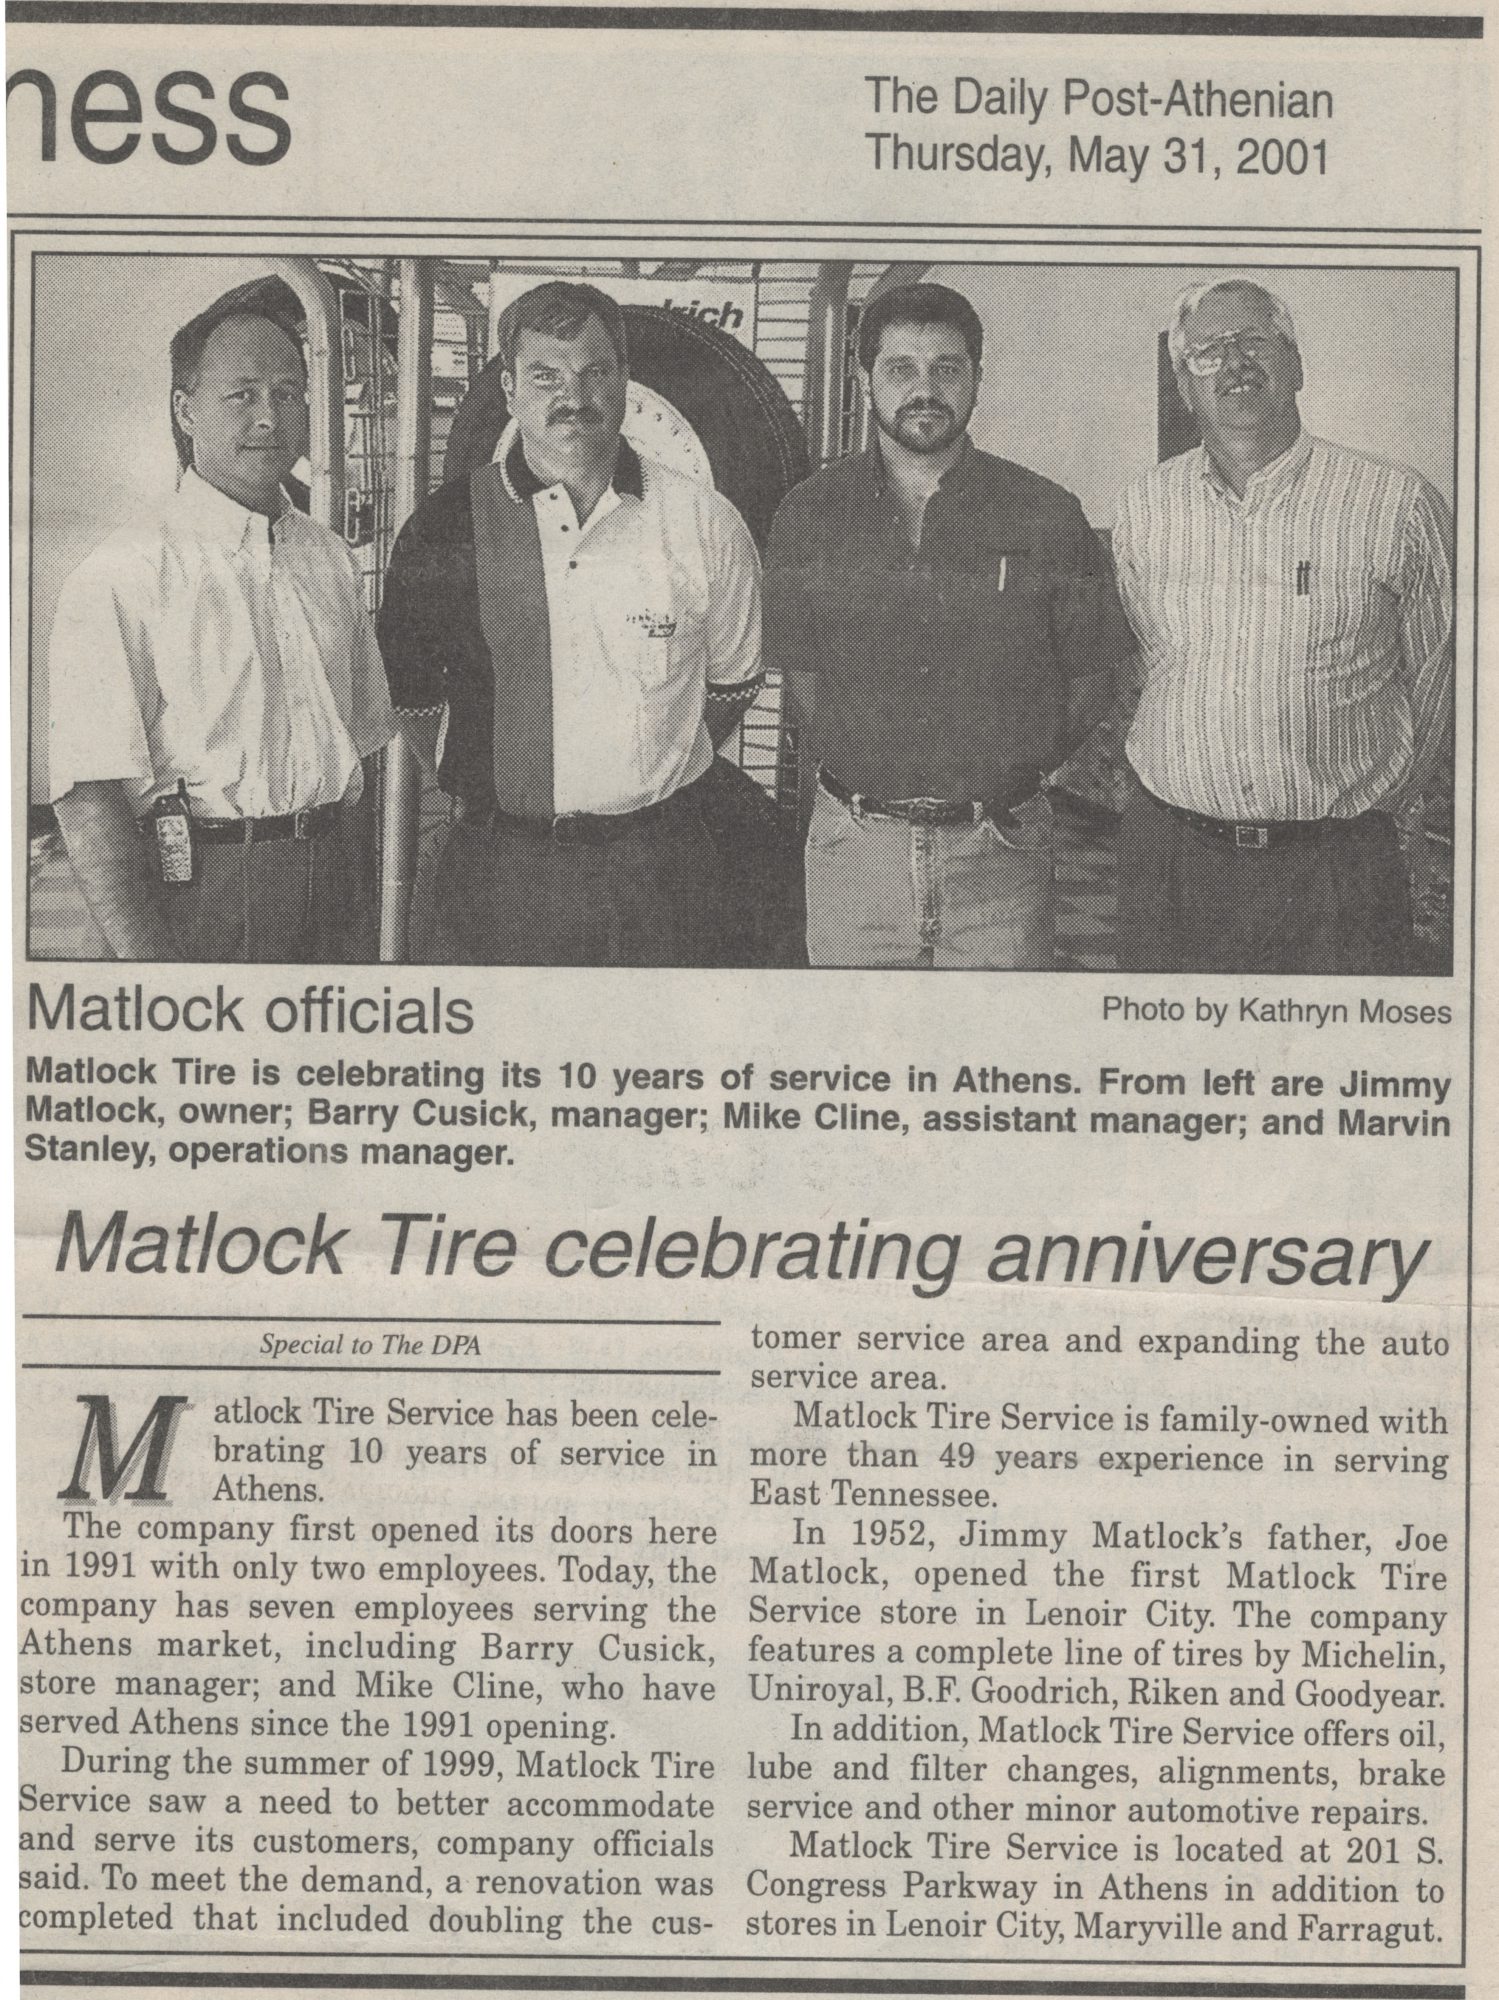 newspaper story from athens, tn in 2001